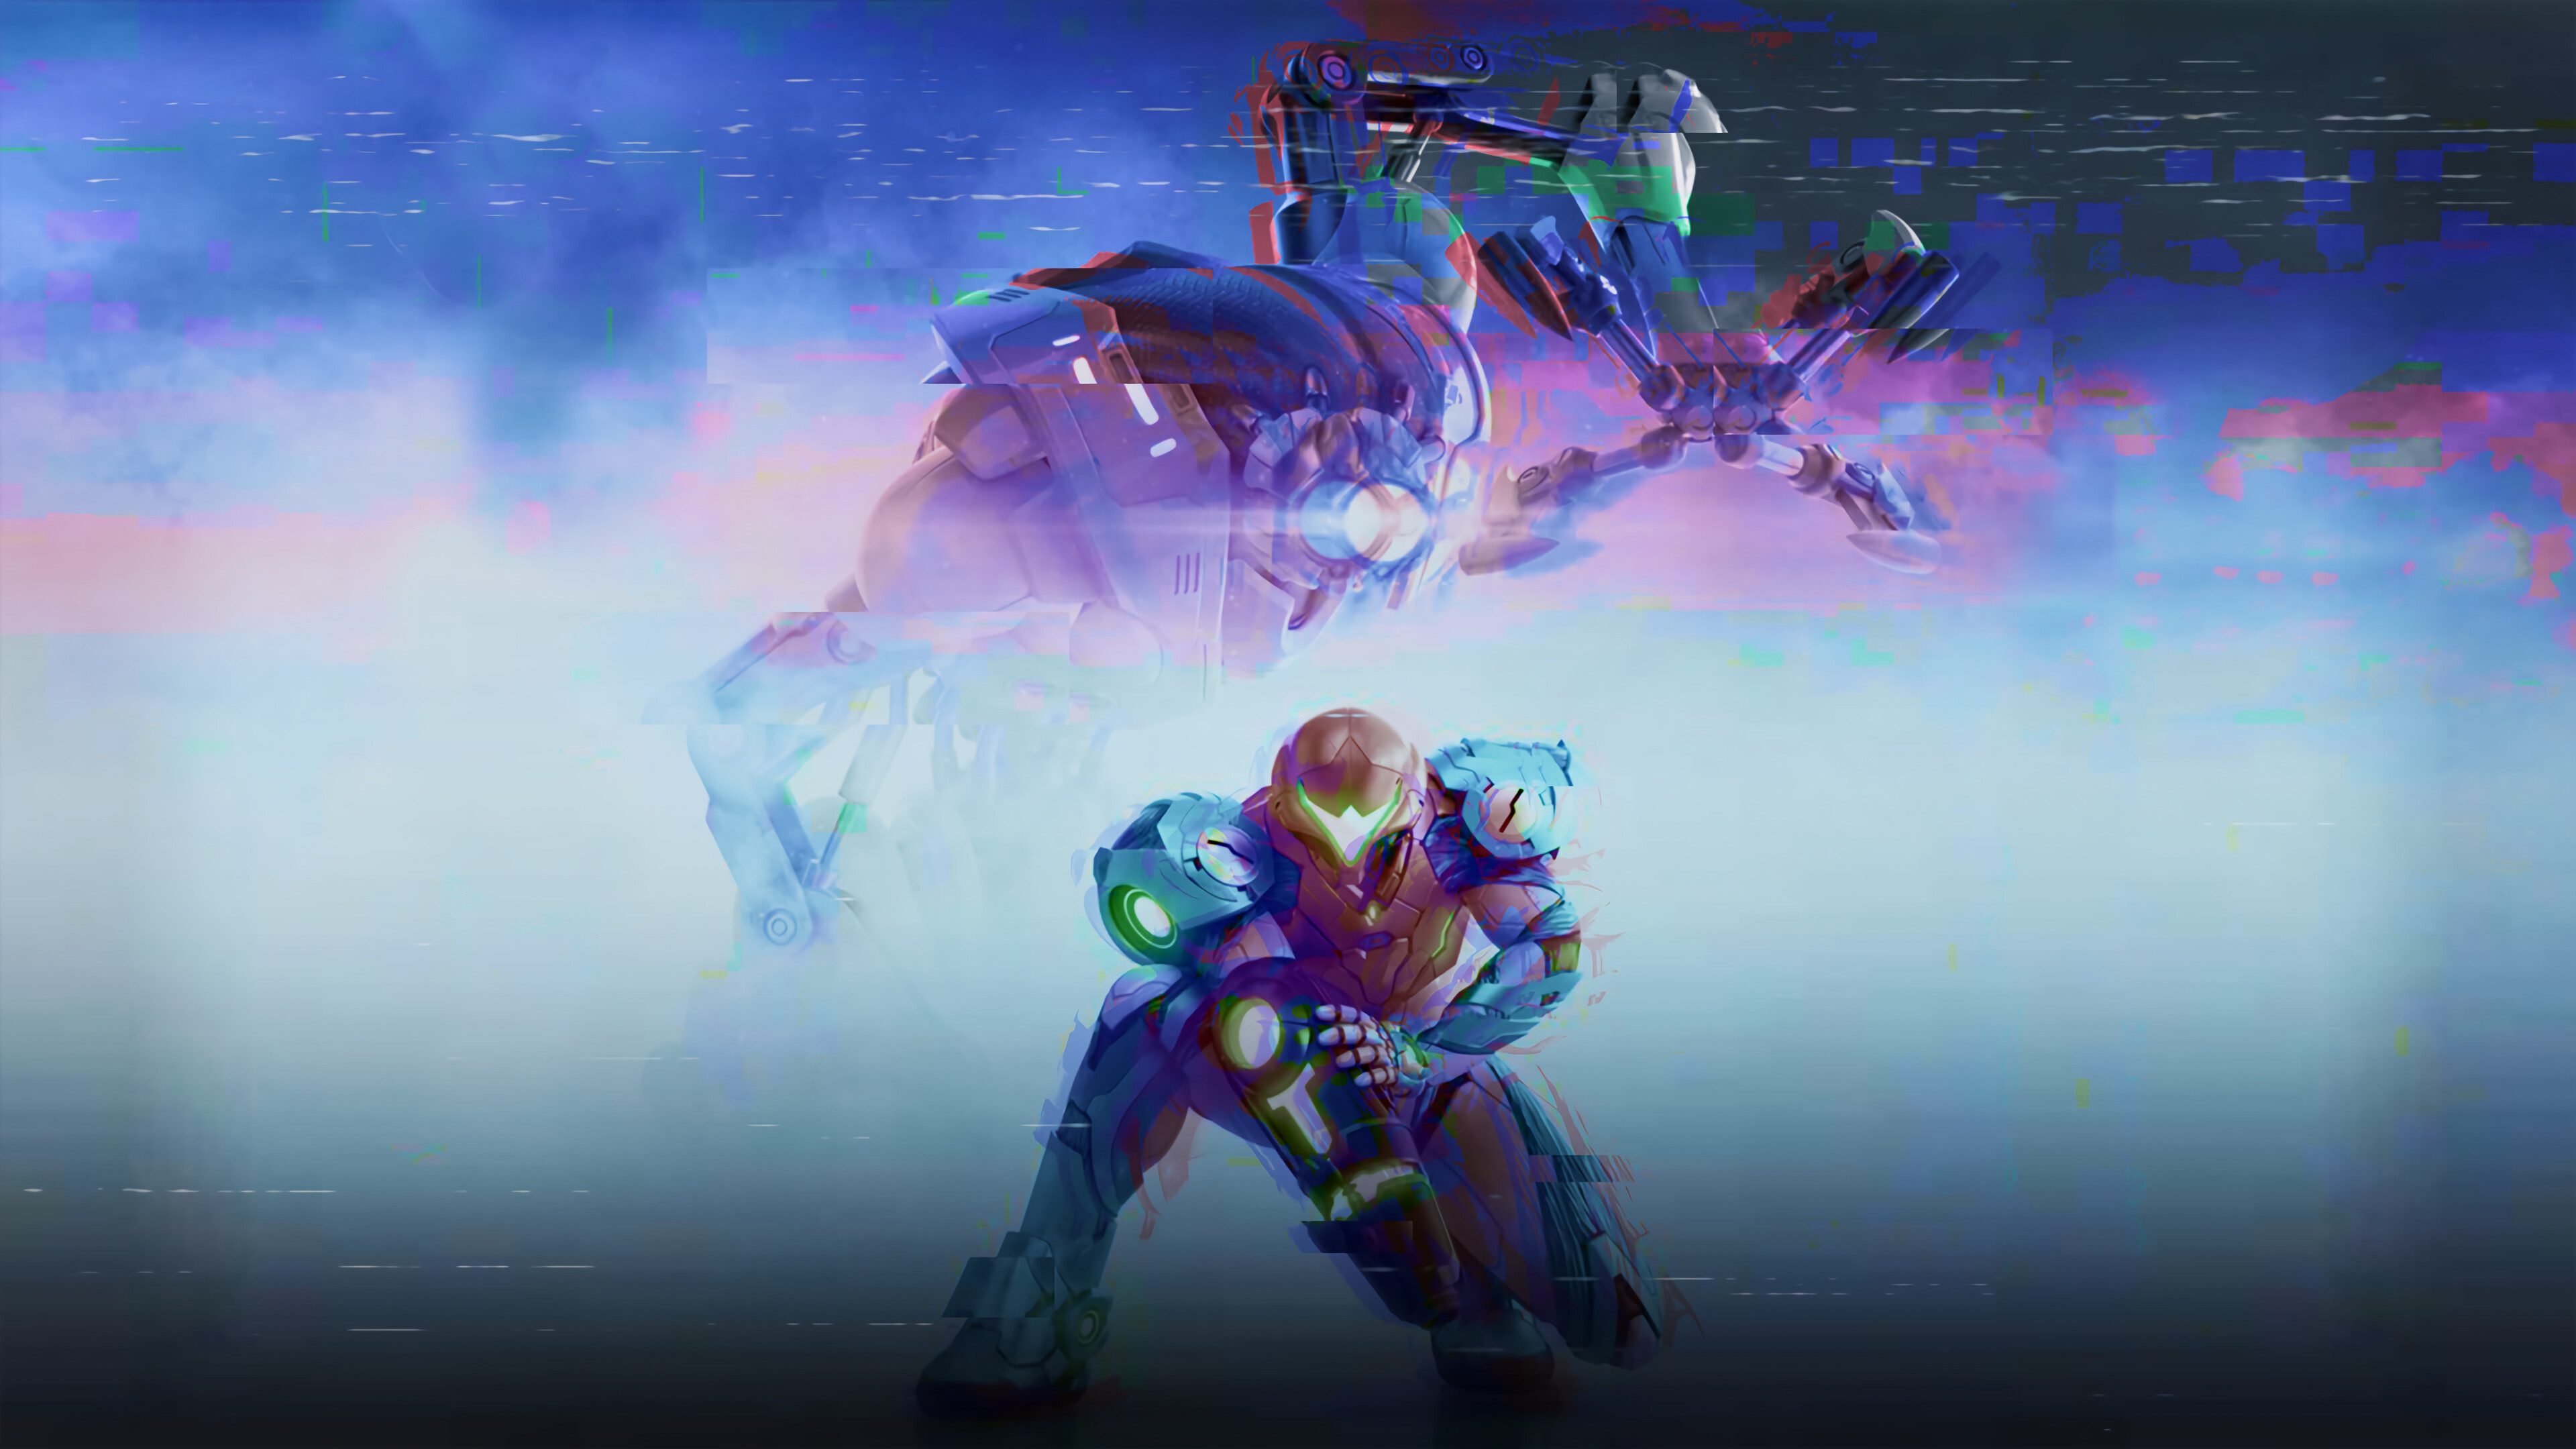 Metroid Dread: An action-adventure video game developed by Nintendo and MercurySteam. 3840x2160 4K Wallpaper.